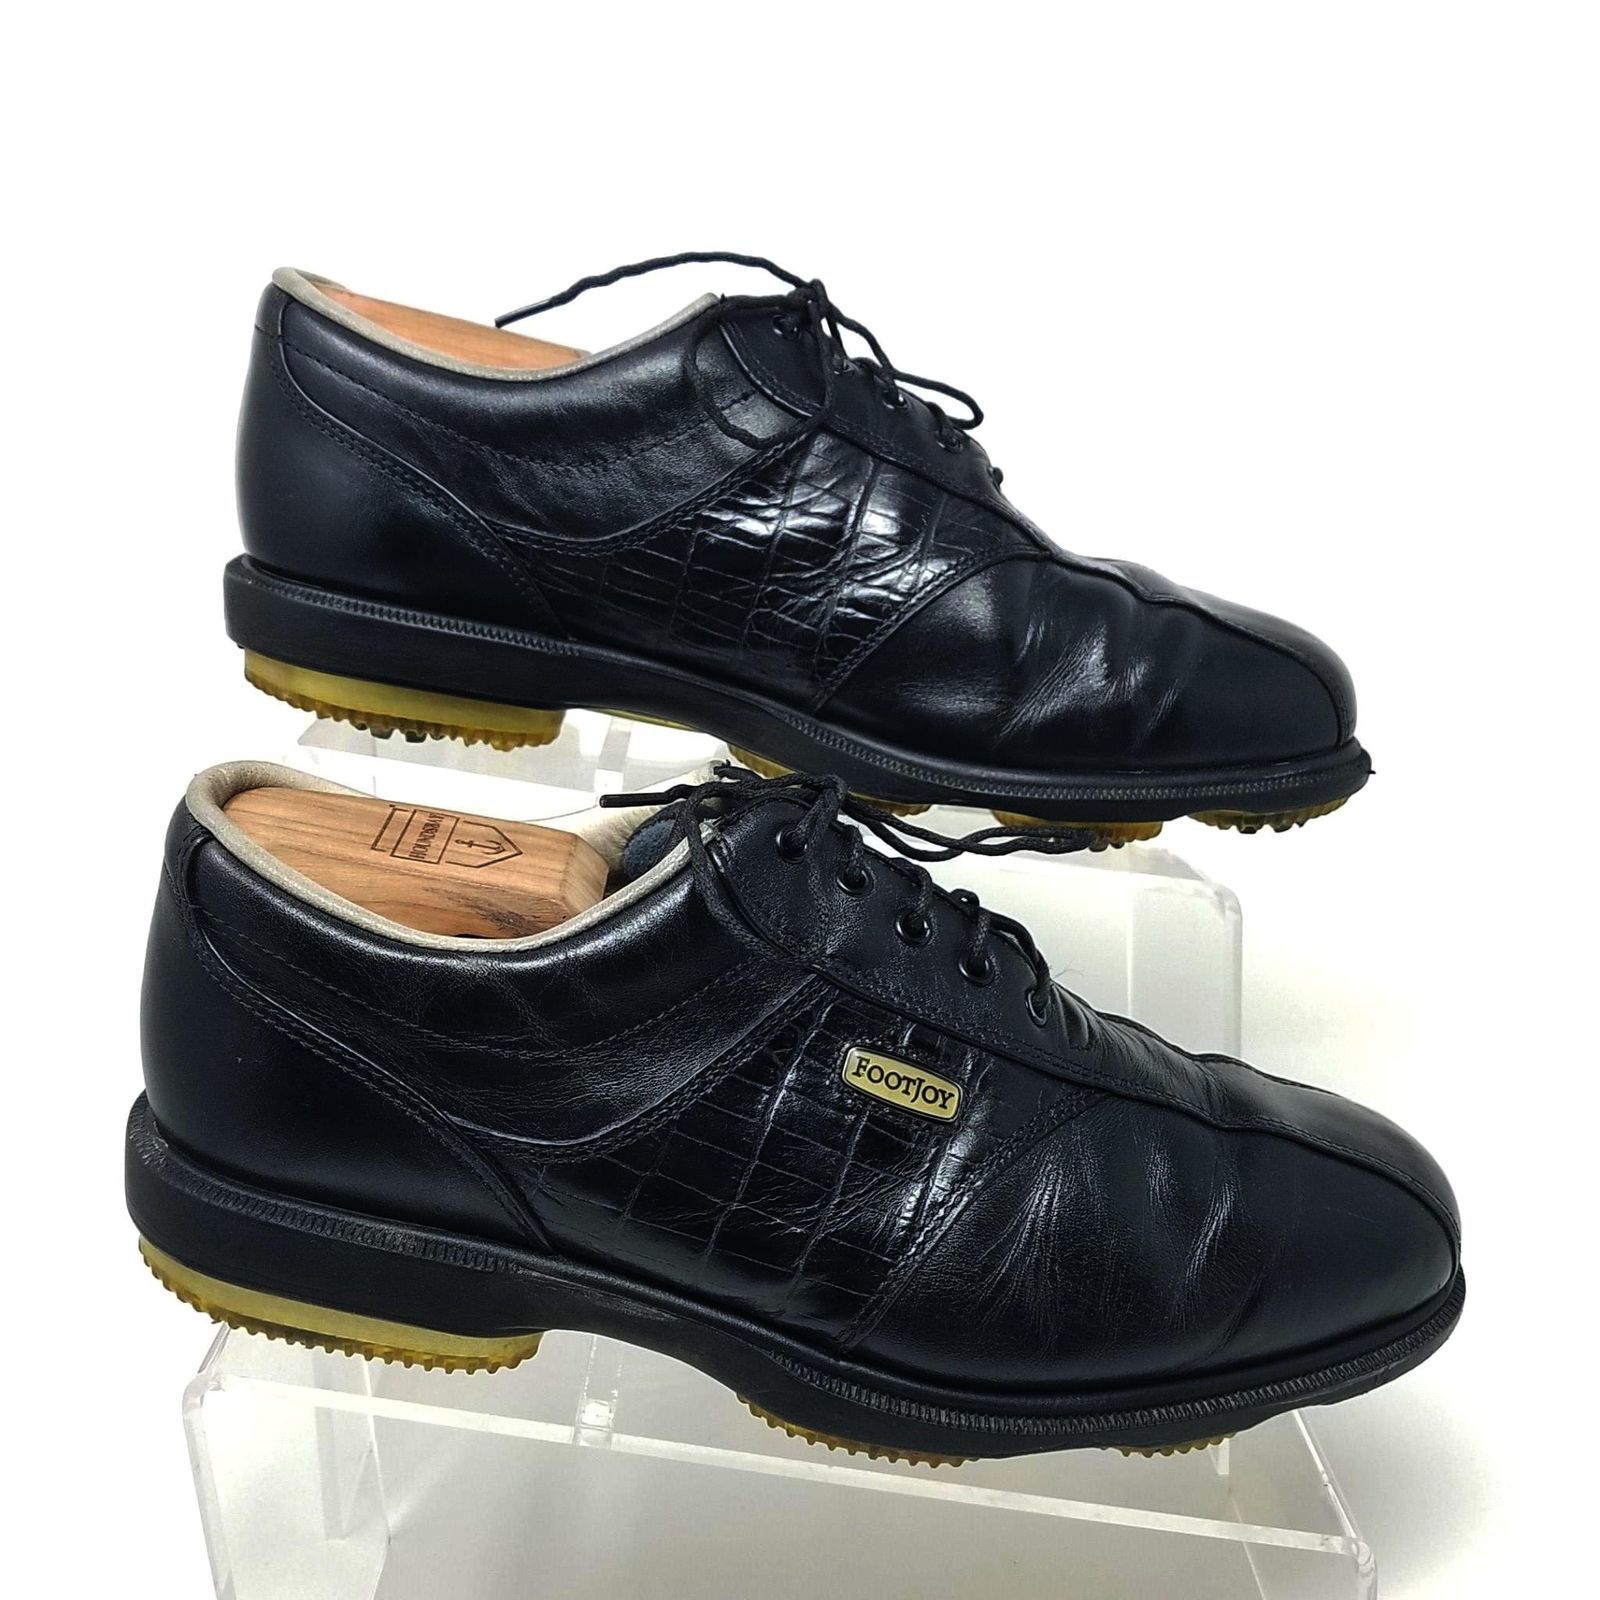 FootJoy Dryjoys Black Leather Lace Up Croc Soft Spike Golf Shoes 53614 ...